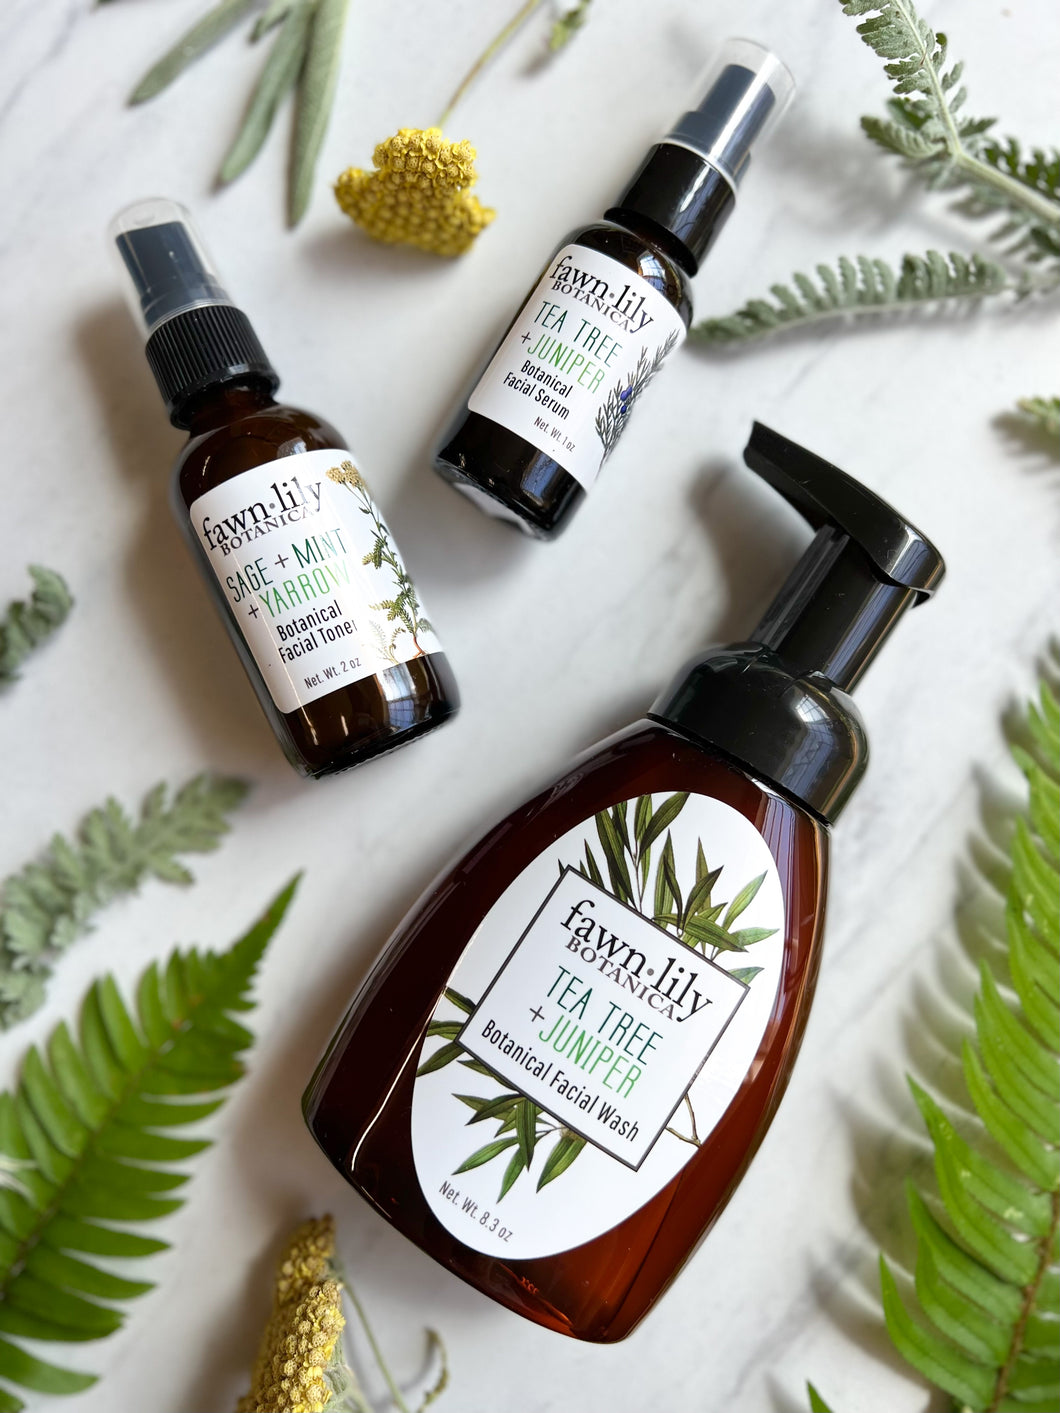 JUNIPER + TEA TREE + MINT FACIAL CARE COLLECTION | Fawn Lily Botanica. Botanical plant-based facial wash cleanser, natural facial toner, moisturizing facial serum set for deep cleansing and skin balancing. Normal, combination, oily, all skin types.